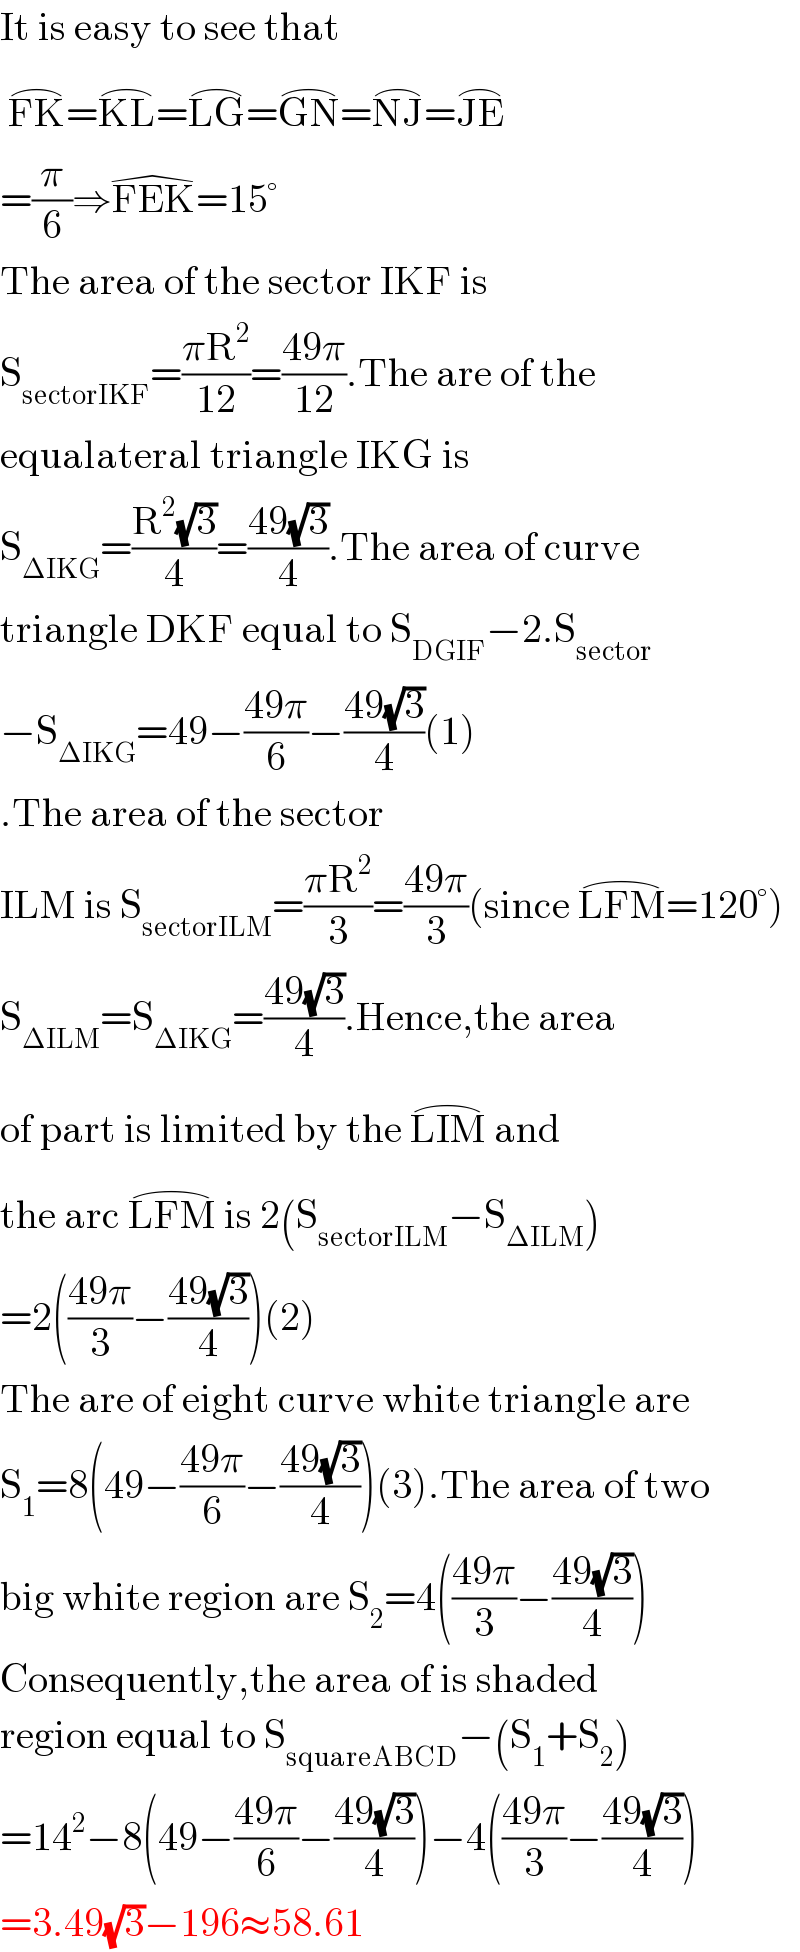 It is easy to see that   FK^(⌢) =KL^(⌢) =LG^(⌢) =GN^(⌢) =NJ^(⌢) =JE^(⌢)   =(π/6)⇒FEK^(�) =15°  The area of the sector IKF is  S_(sectorIKF) =((πR^2 )/(12))=((49π)/(12)).The are of the  equalateral triangle IKG is  S_(ΔIKG) =((R^2 (√3))/4)=((49(√3))/4).The area of curve  triangle DKF equal to S_(DGIF) −2.S_(sector)   −S_(ΔIKG) =49−((49π)/6)−((49(√3))/4)(1)  .The area of the sector  ILM is S_(sectorILM) =((πR^2 )/3)=((49π)/3)(since LFM^(⌢) =120°)  S_(ΔILM) =S_(ΔIKG) =((49(√3))/4).Hence,the area  of part is limited by the LIM^(⌢)  and  the arc LFM^(⌢)  is 2(S_(sectorILM) −S_(ΔILM) )  =2(((49π)/3)−((49(√3))/4))(2)  The are of eight curve white triangle are  S_1 =8(49−((49π)/6)−((49(√3))/4))(3).The area of two   big white region are S_2 =4(((49π)/3)−((49(√3))/4))  Consequently,the area of is shaded   region equal to S_(squareABCD) −(S_1 +S_2 )  =14^2 −8(49−((49π)/6)−((49(√3))/4))−4(((49π)/3)−((49(√3))/4))  =3.49(√3)−196≈58.61  